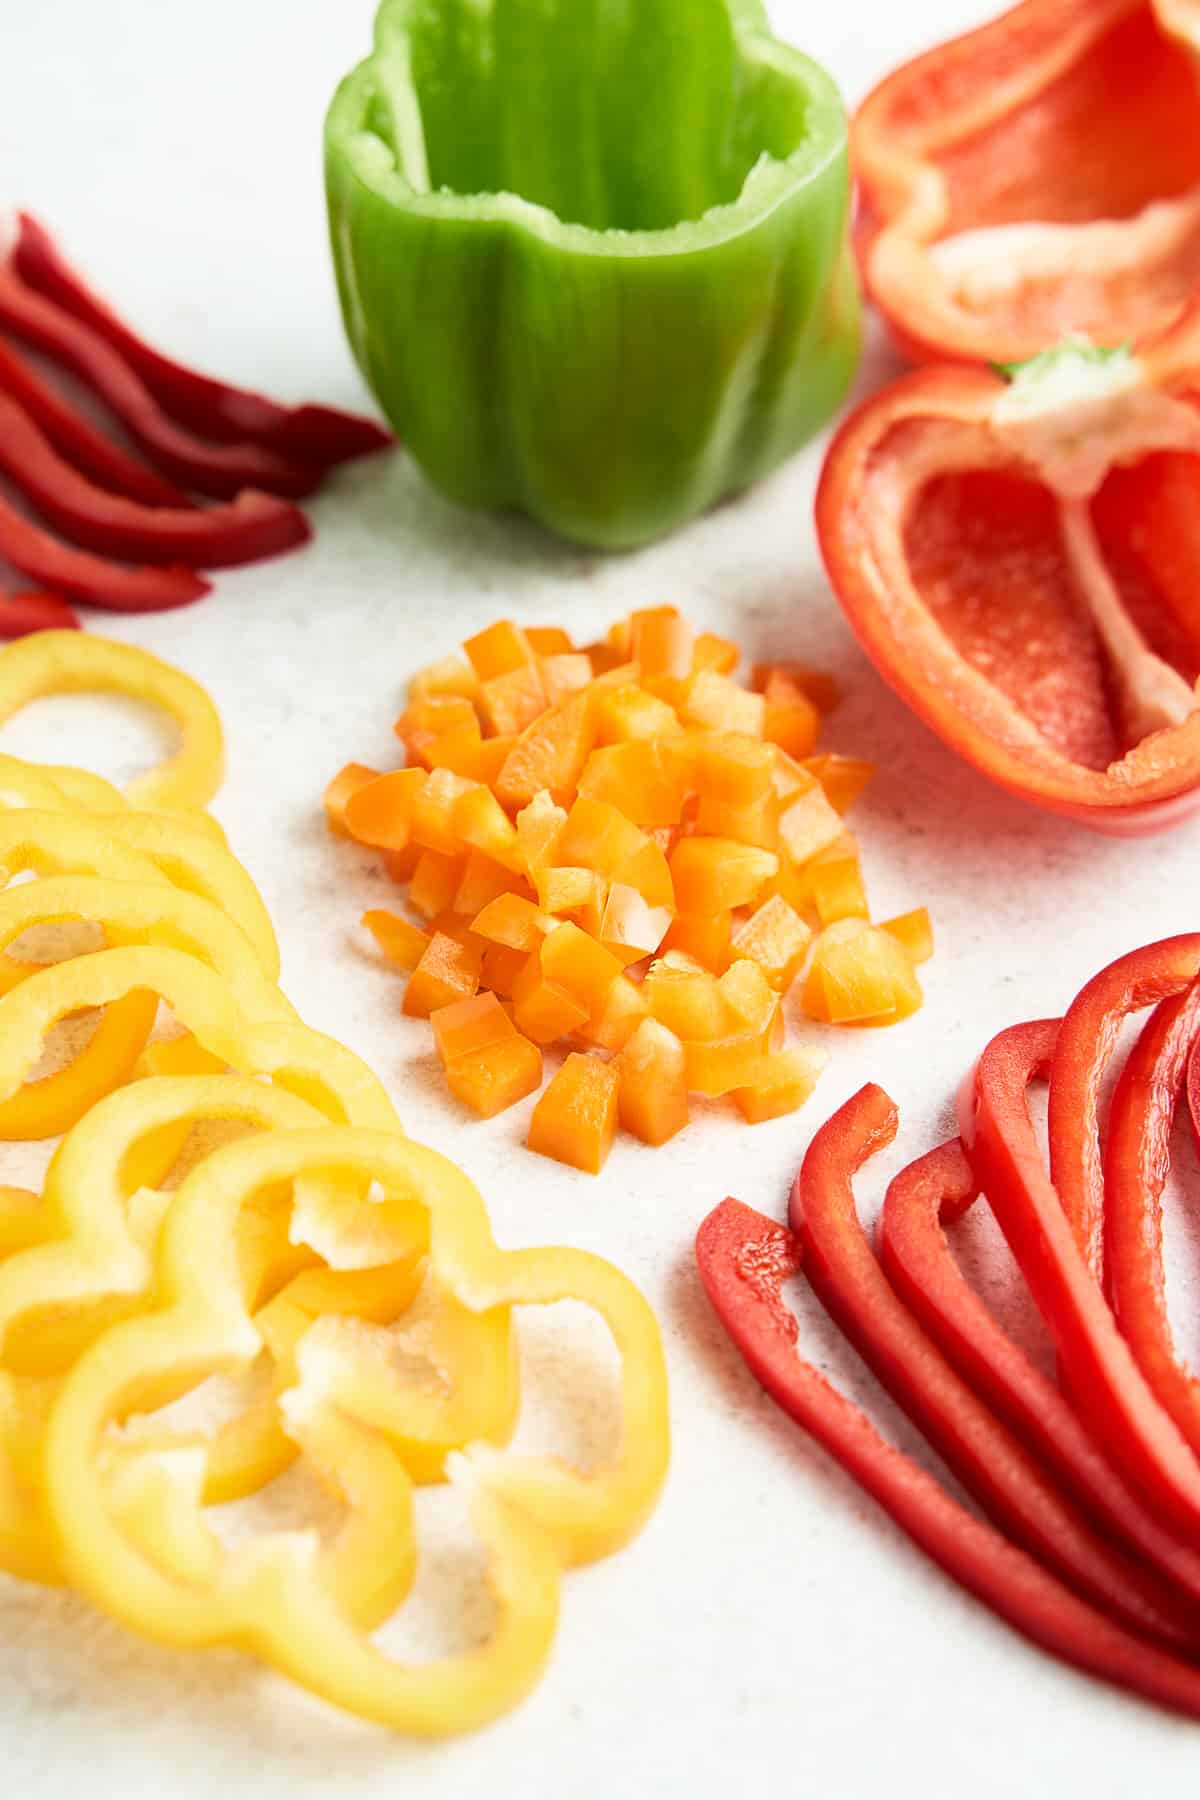 How to cut bell peppers.